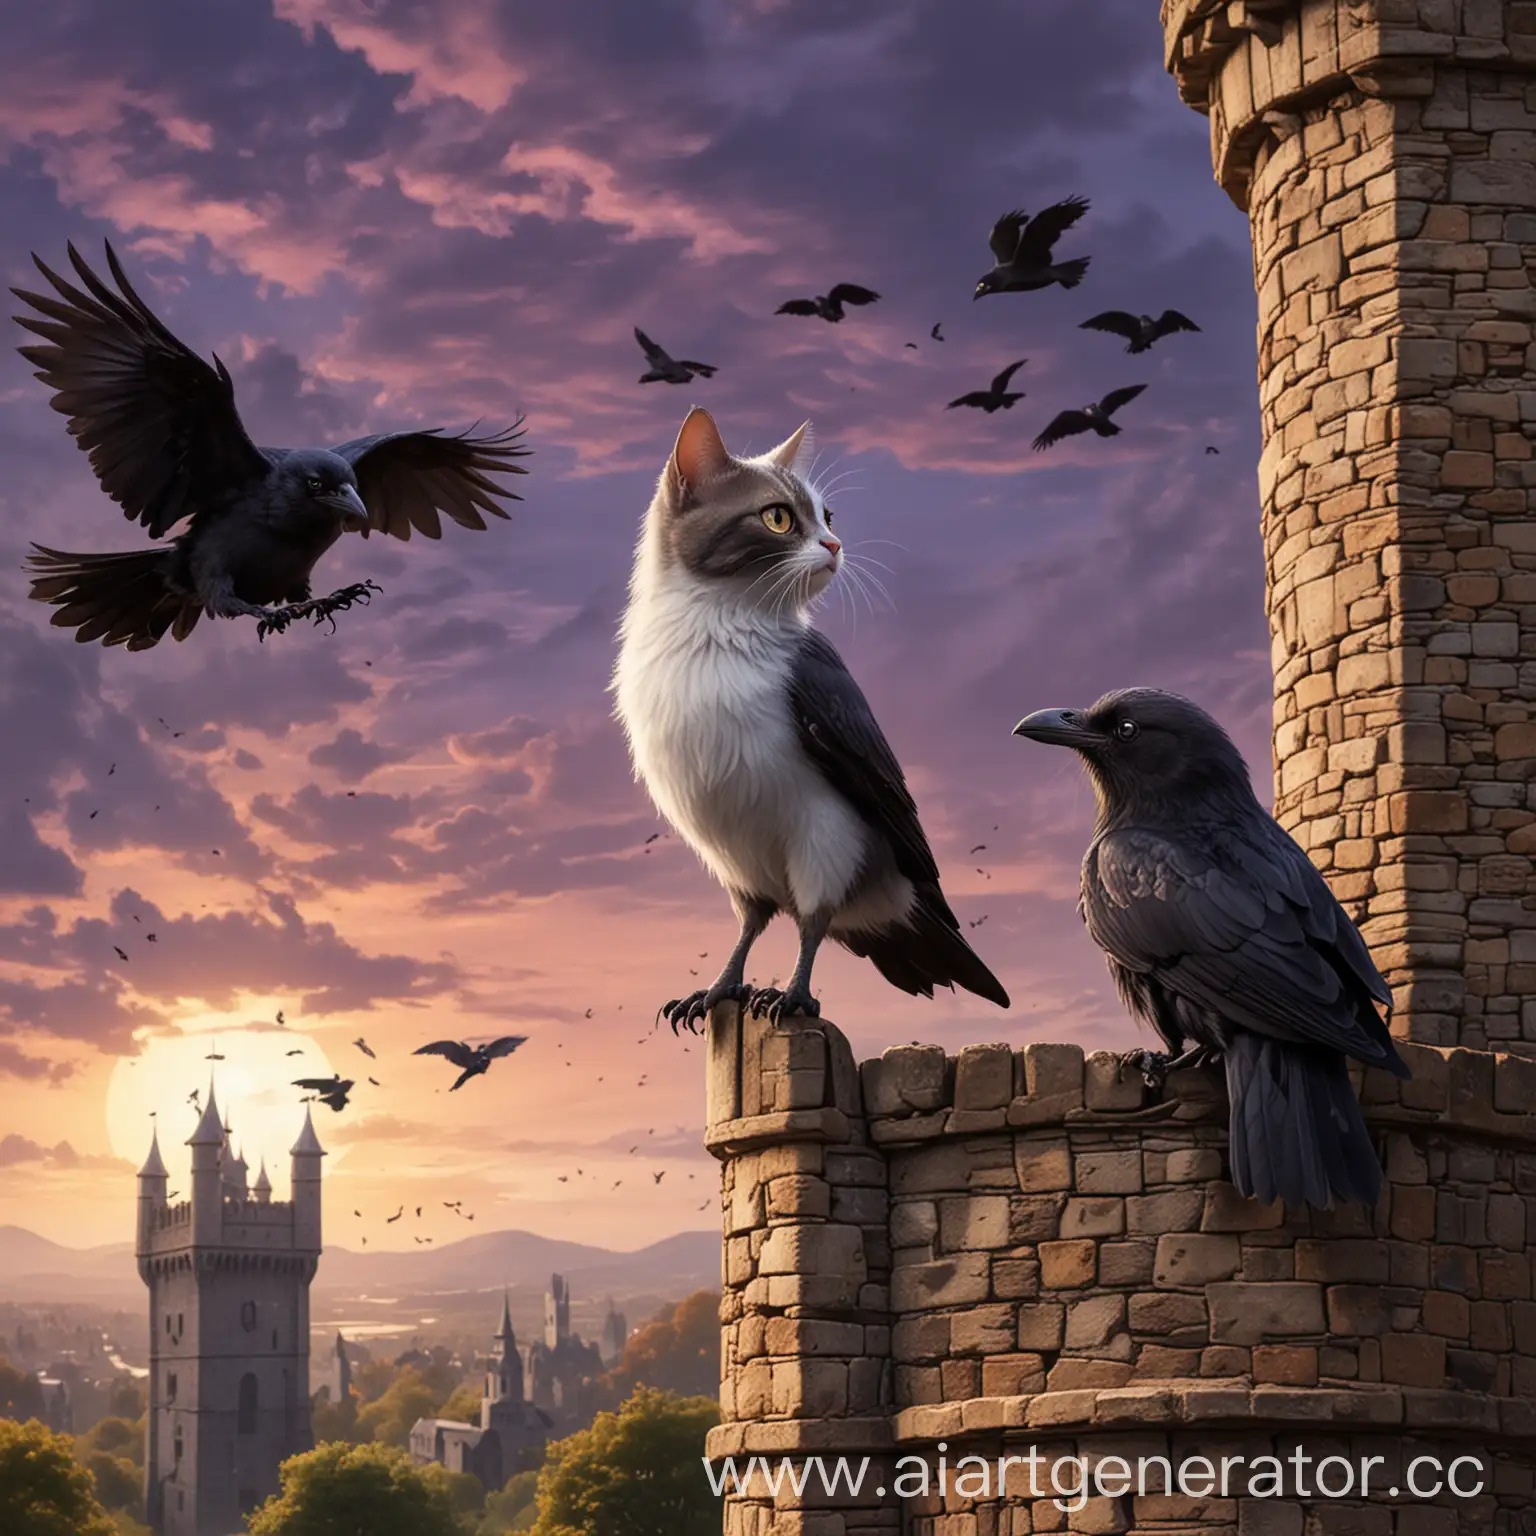 THE LITTLE CAT MEW MEW MEETS THE RAVENS IN THE TOWER
 